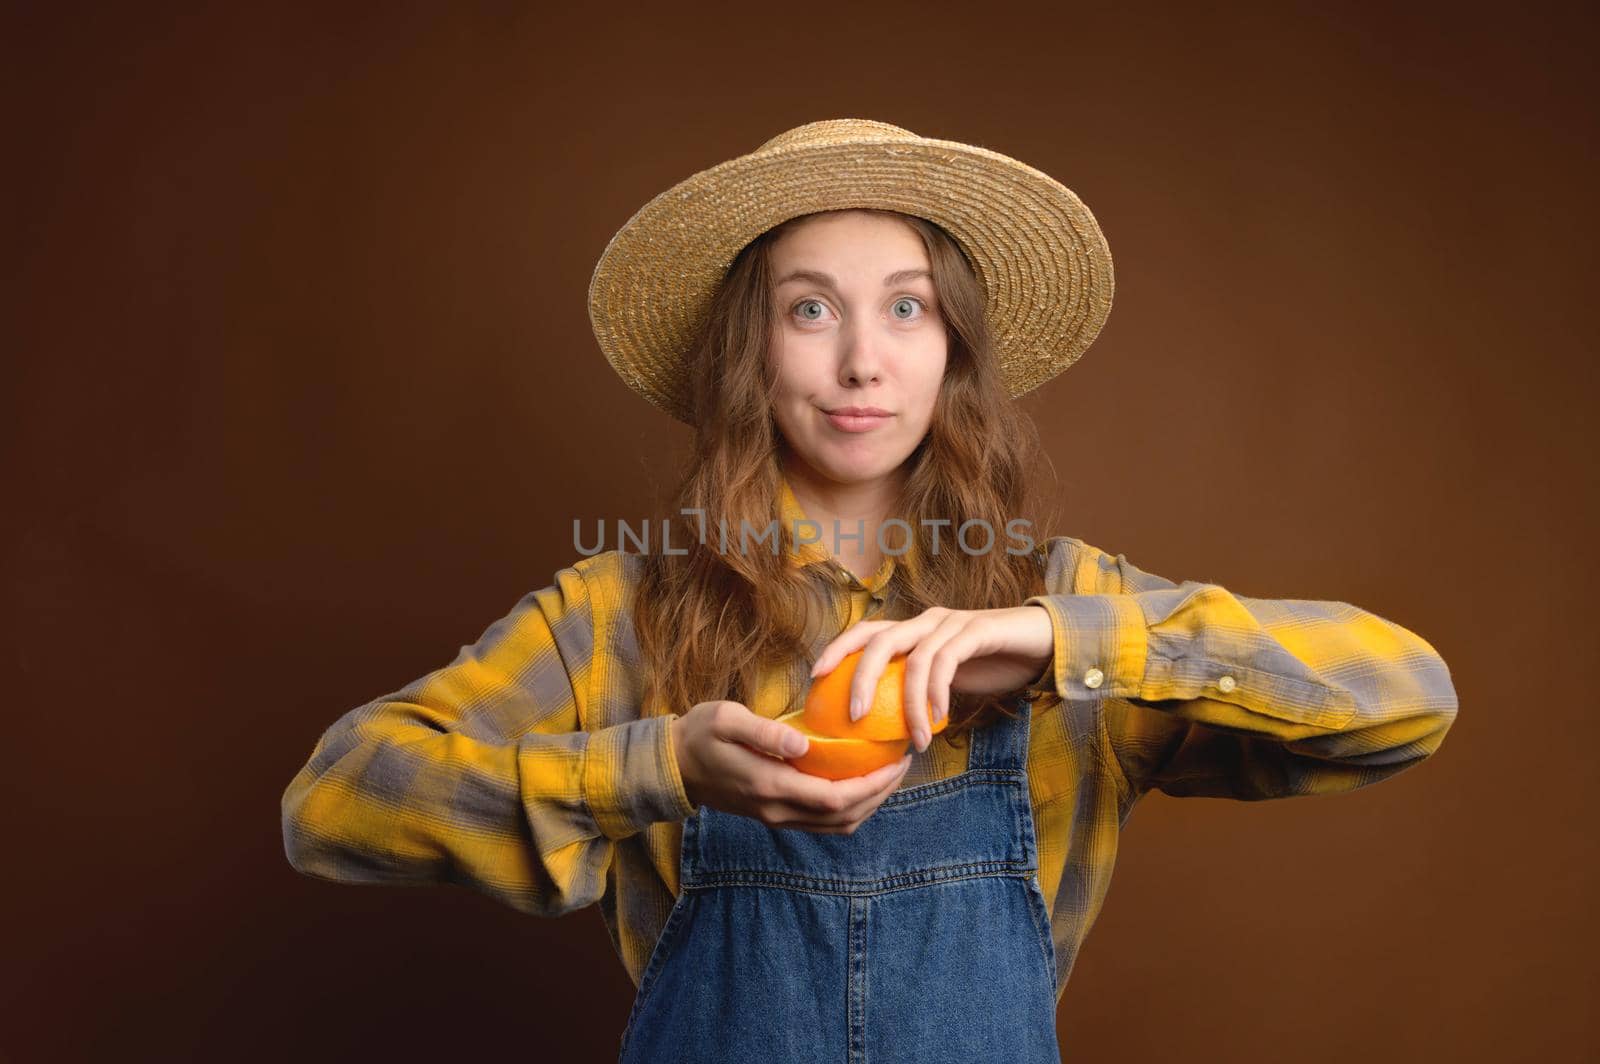 Attractive rustic Caucasian young woman in straw hat holding cut orange fruit. Studio portrait over brown background. Looks into the camera.